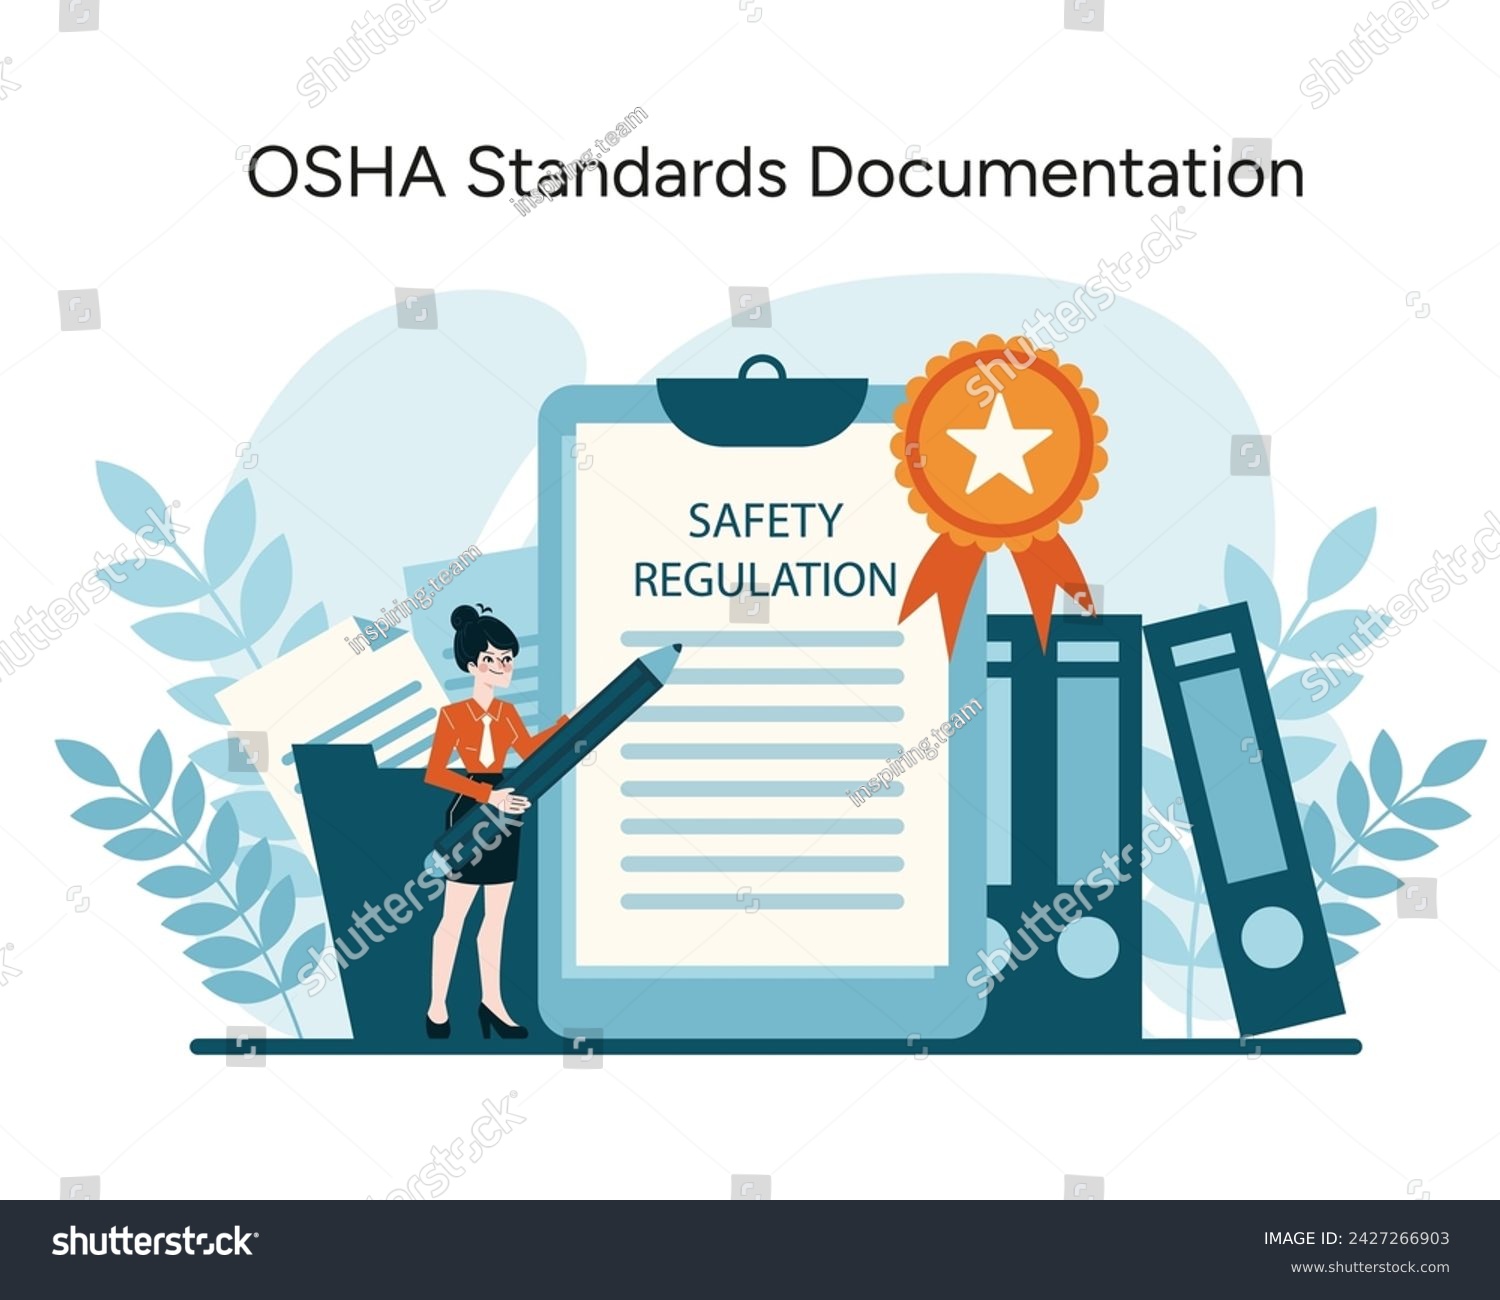 OSHA Standards Documentation vector. A professional ensuring rigorous safety regulation adherence, signified by certification. Essential for workplace compliance. Flat vector illustration #2427266903